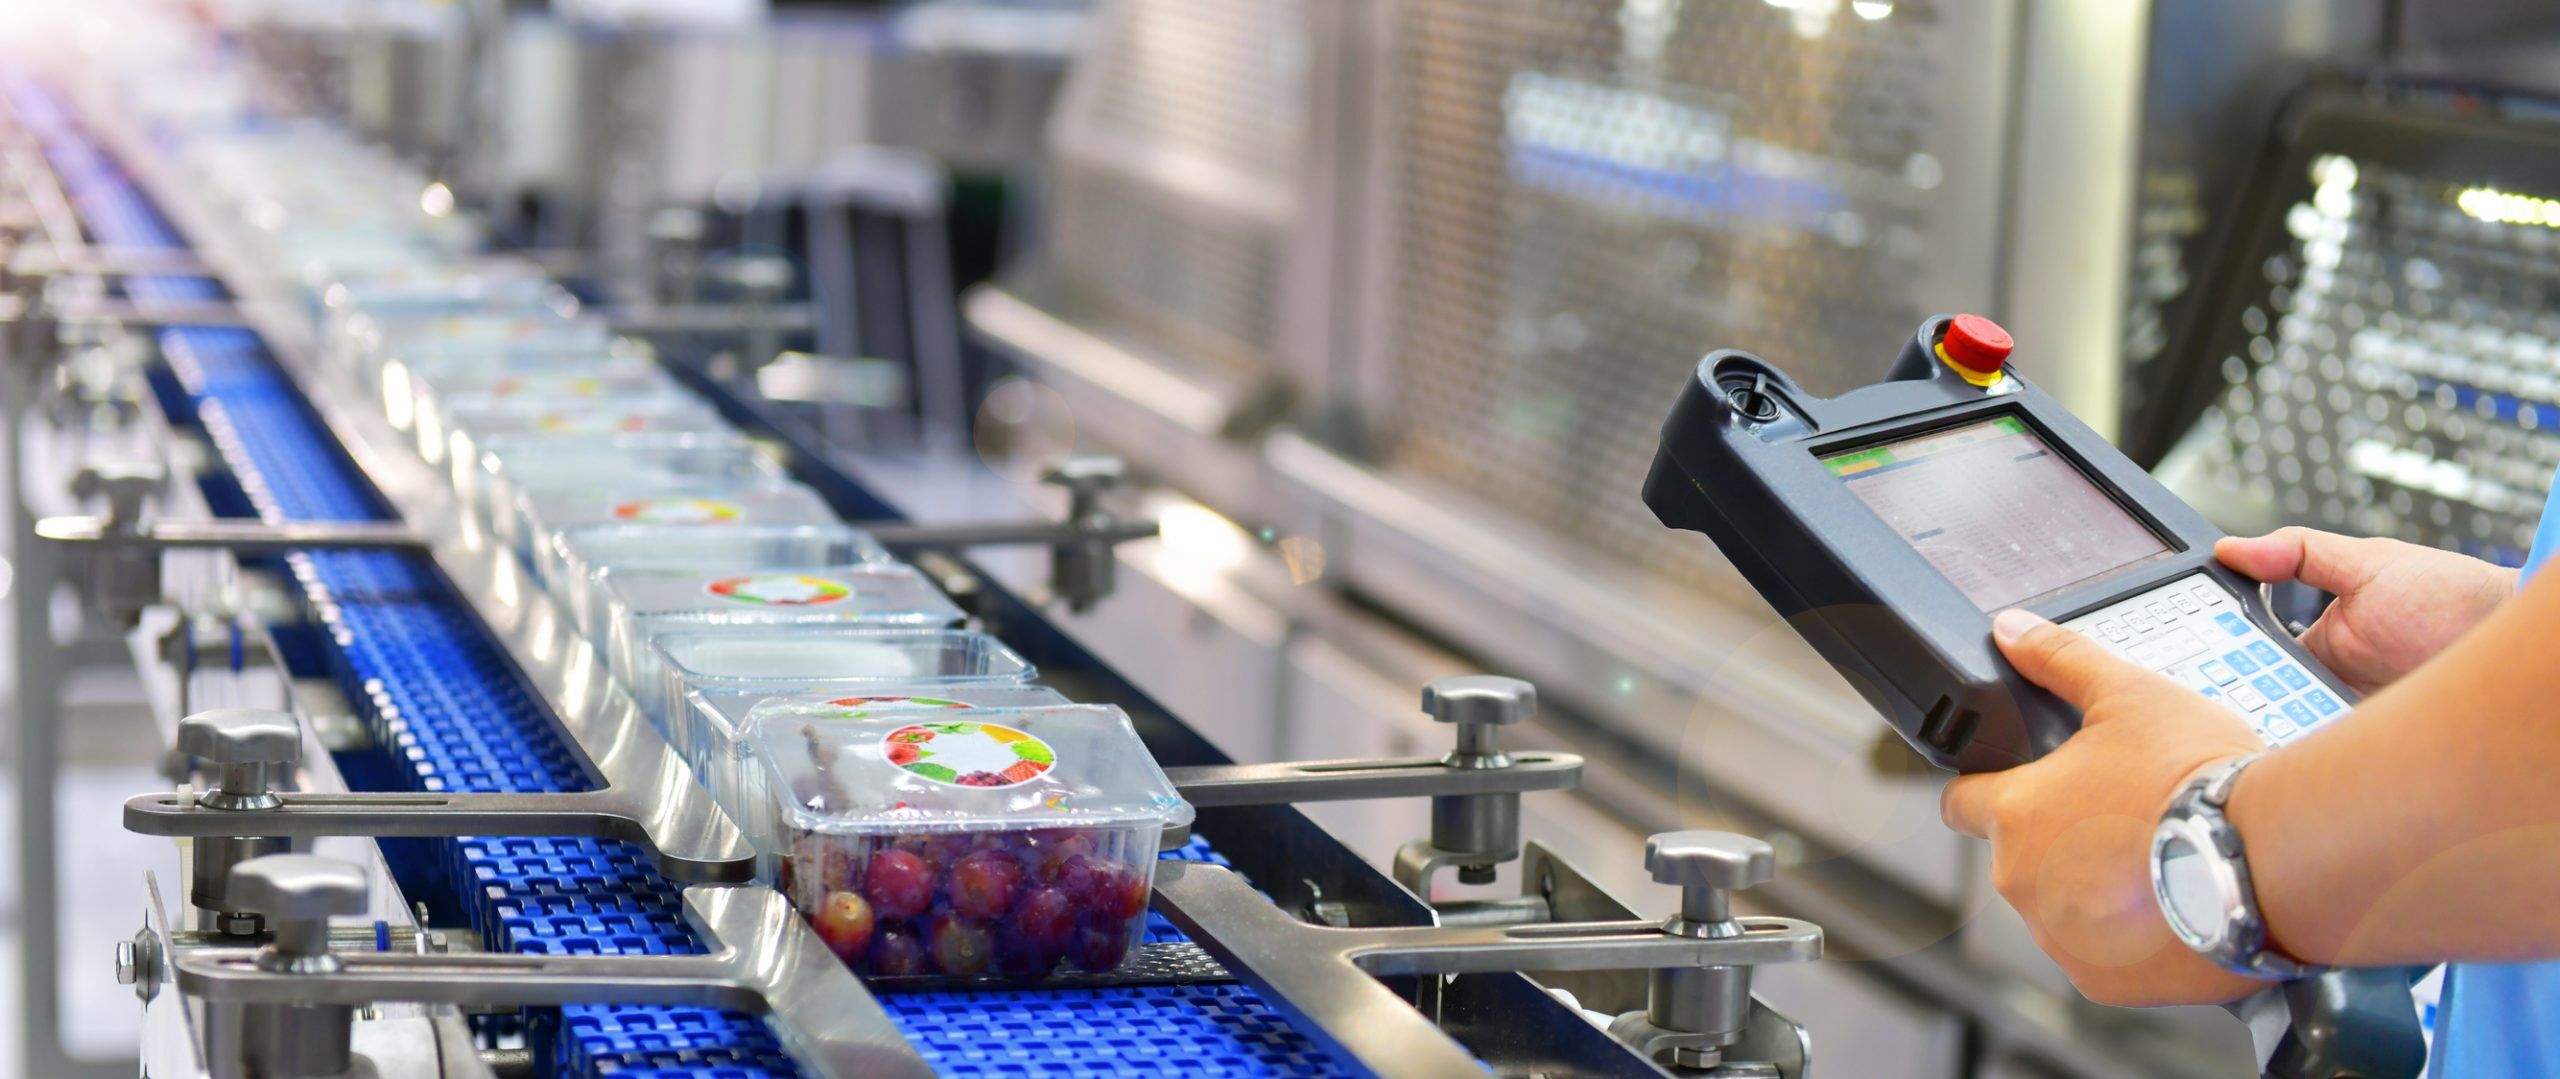 Competition, increasing consumer demand driving automation in food